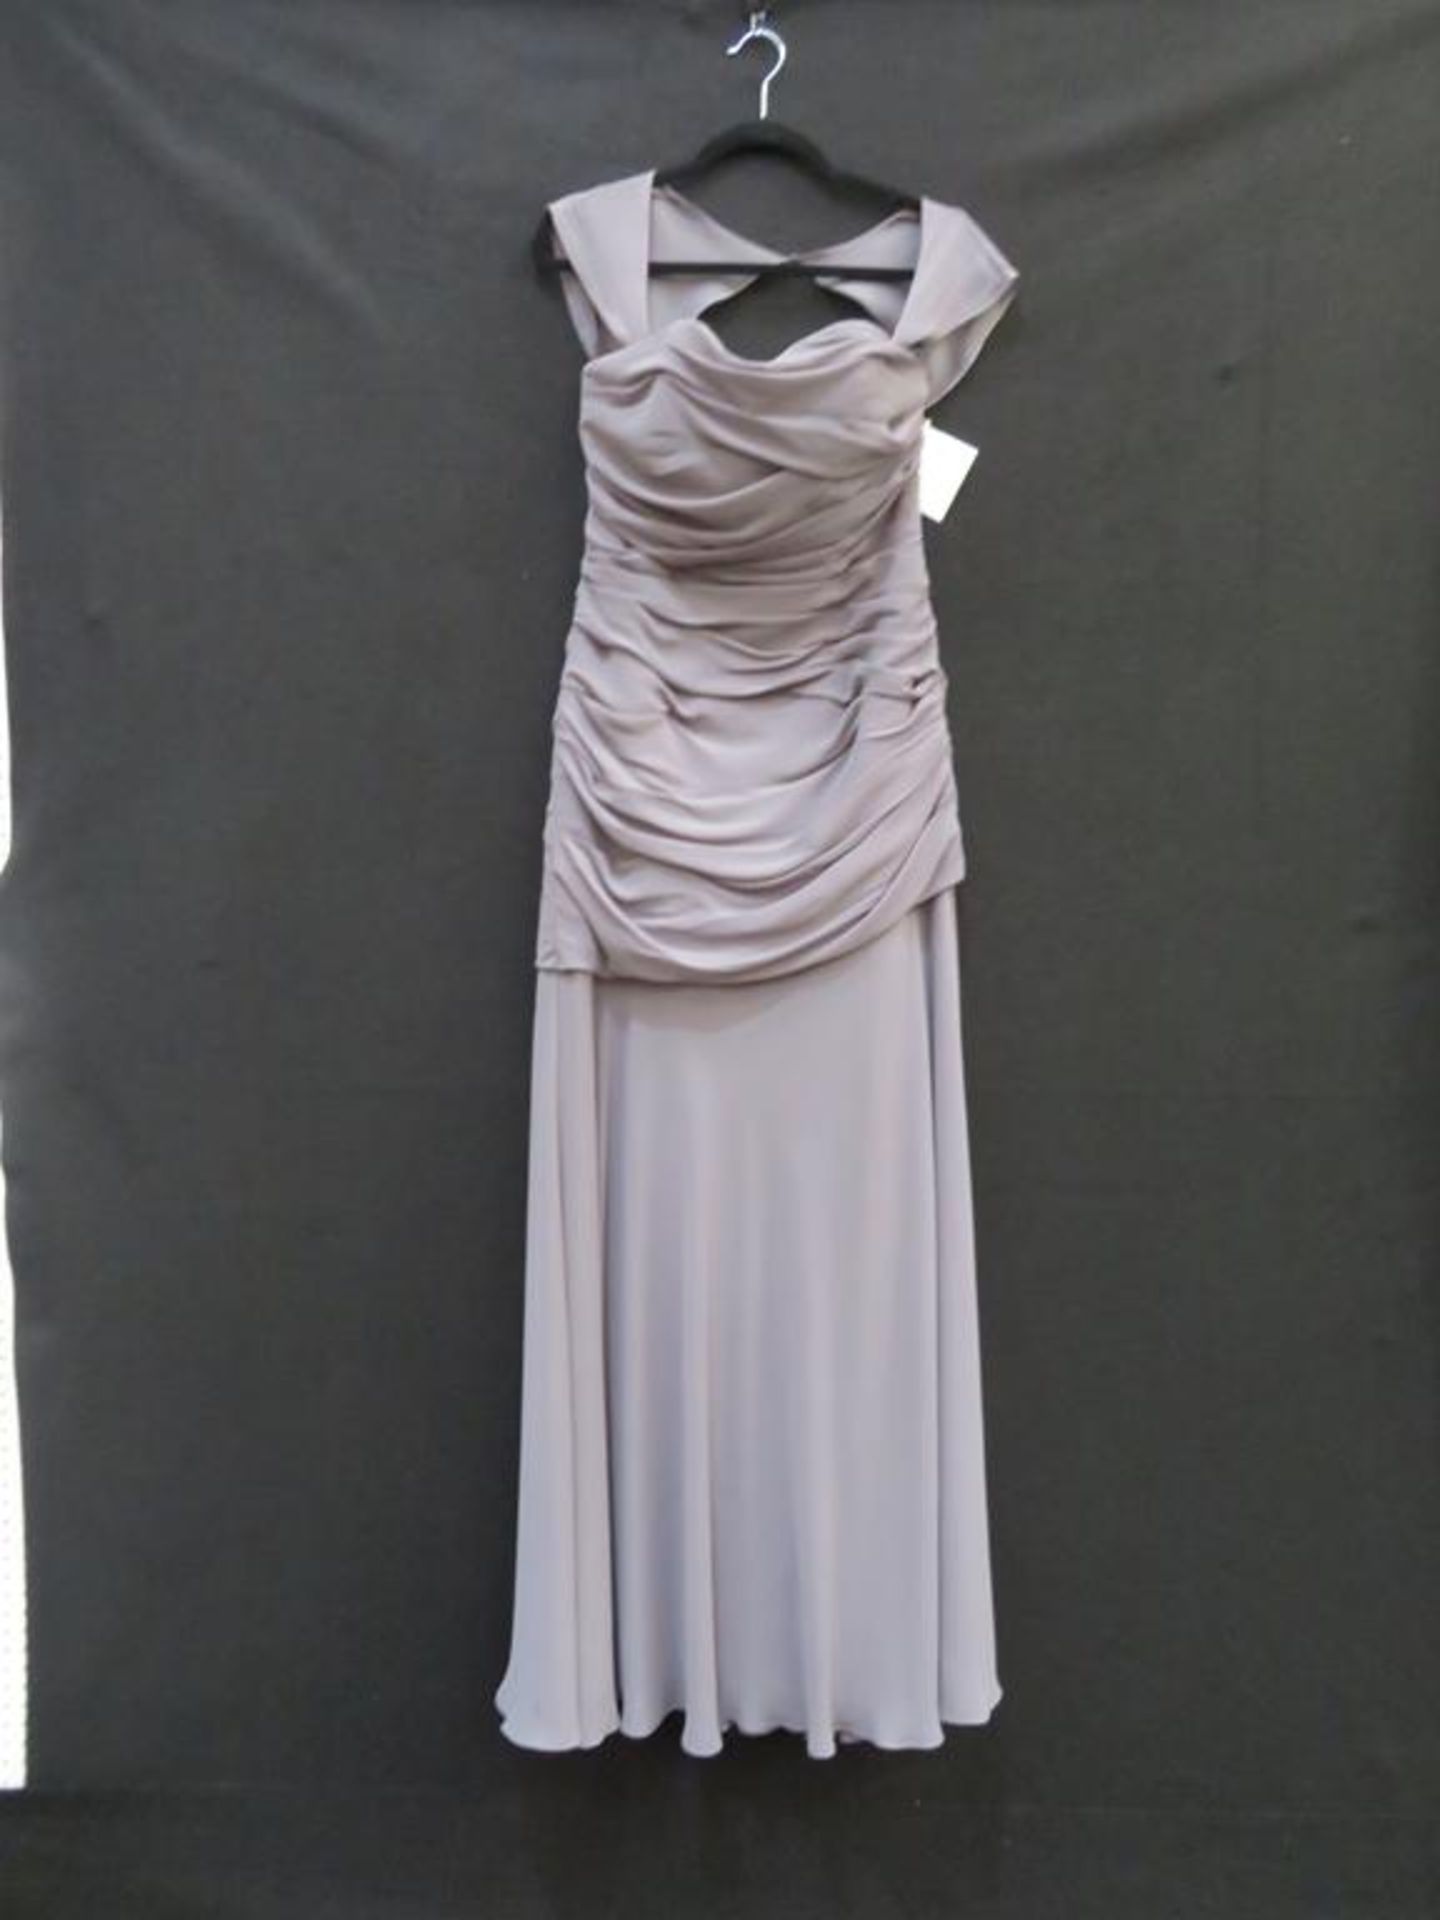 Five 'Charcoal/Show etc Bridal Gowns in various styles - Image 23 of 33